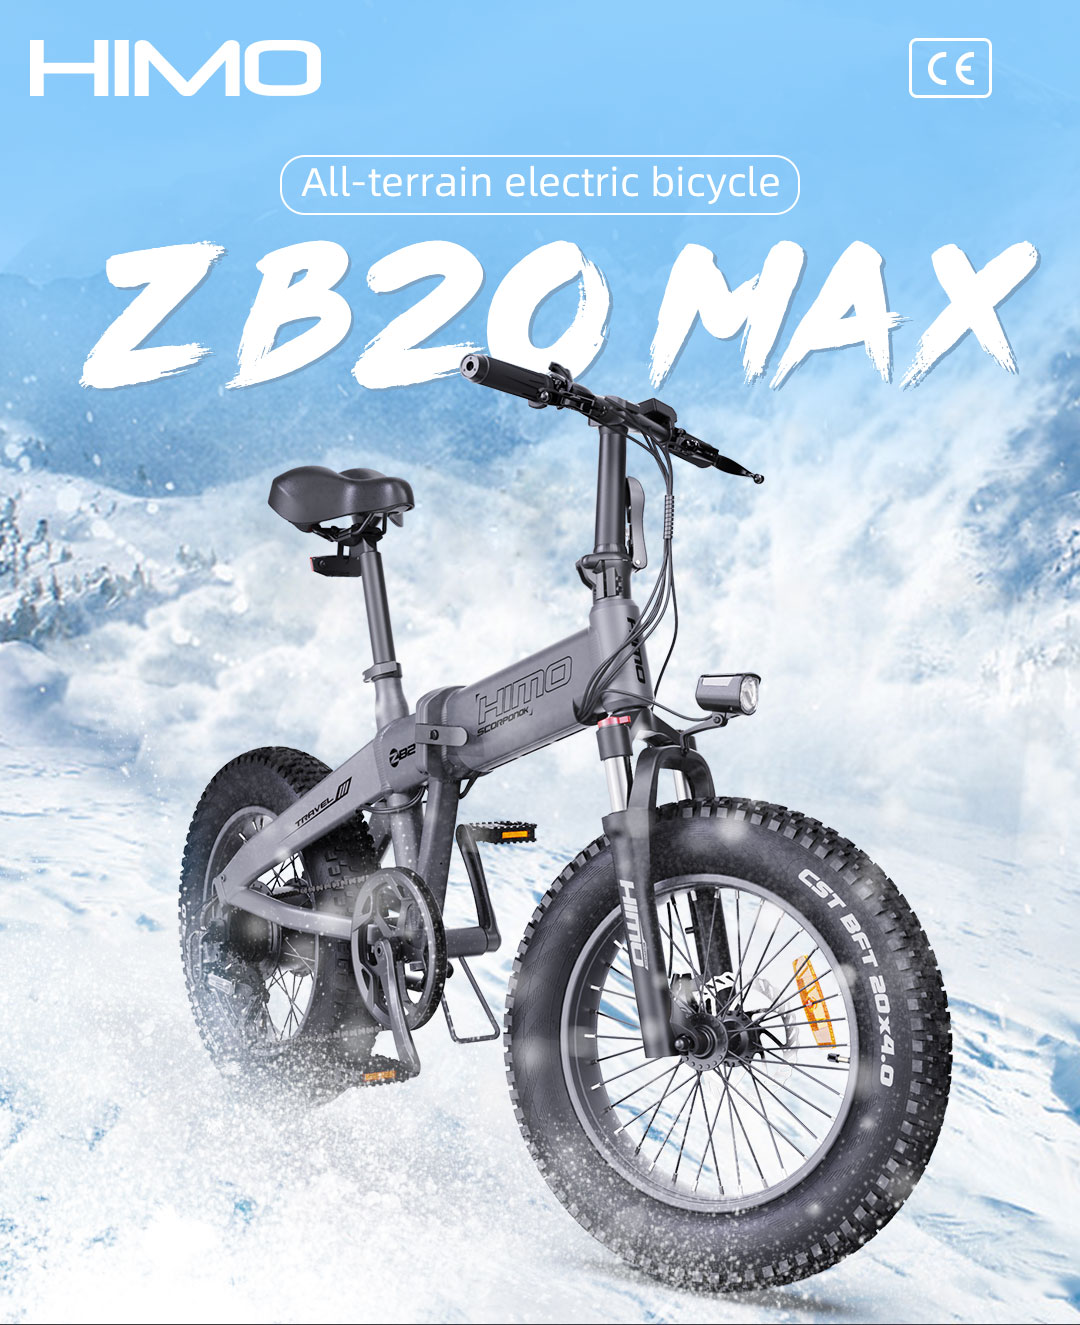 HIMO ZB20 MAX Global version Folding Electric Mountain Bike 20" Wheels 4 Inch Fat Wide Tires 350W Motor Shimano 6 Speeds Derailleur 48V 10Ah Detachable Lithium Battery Dual Disc Brake Hydraulic Shock Folk LCD Display Up to 80km - Grey